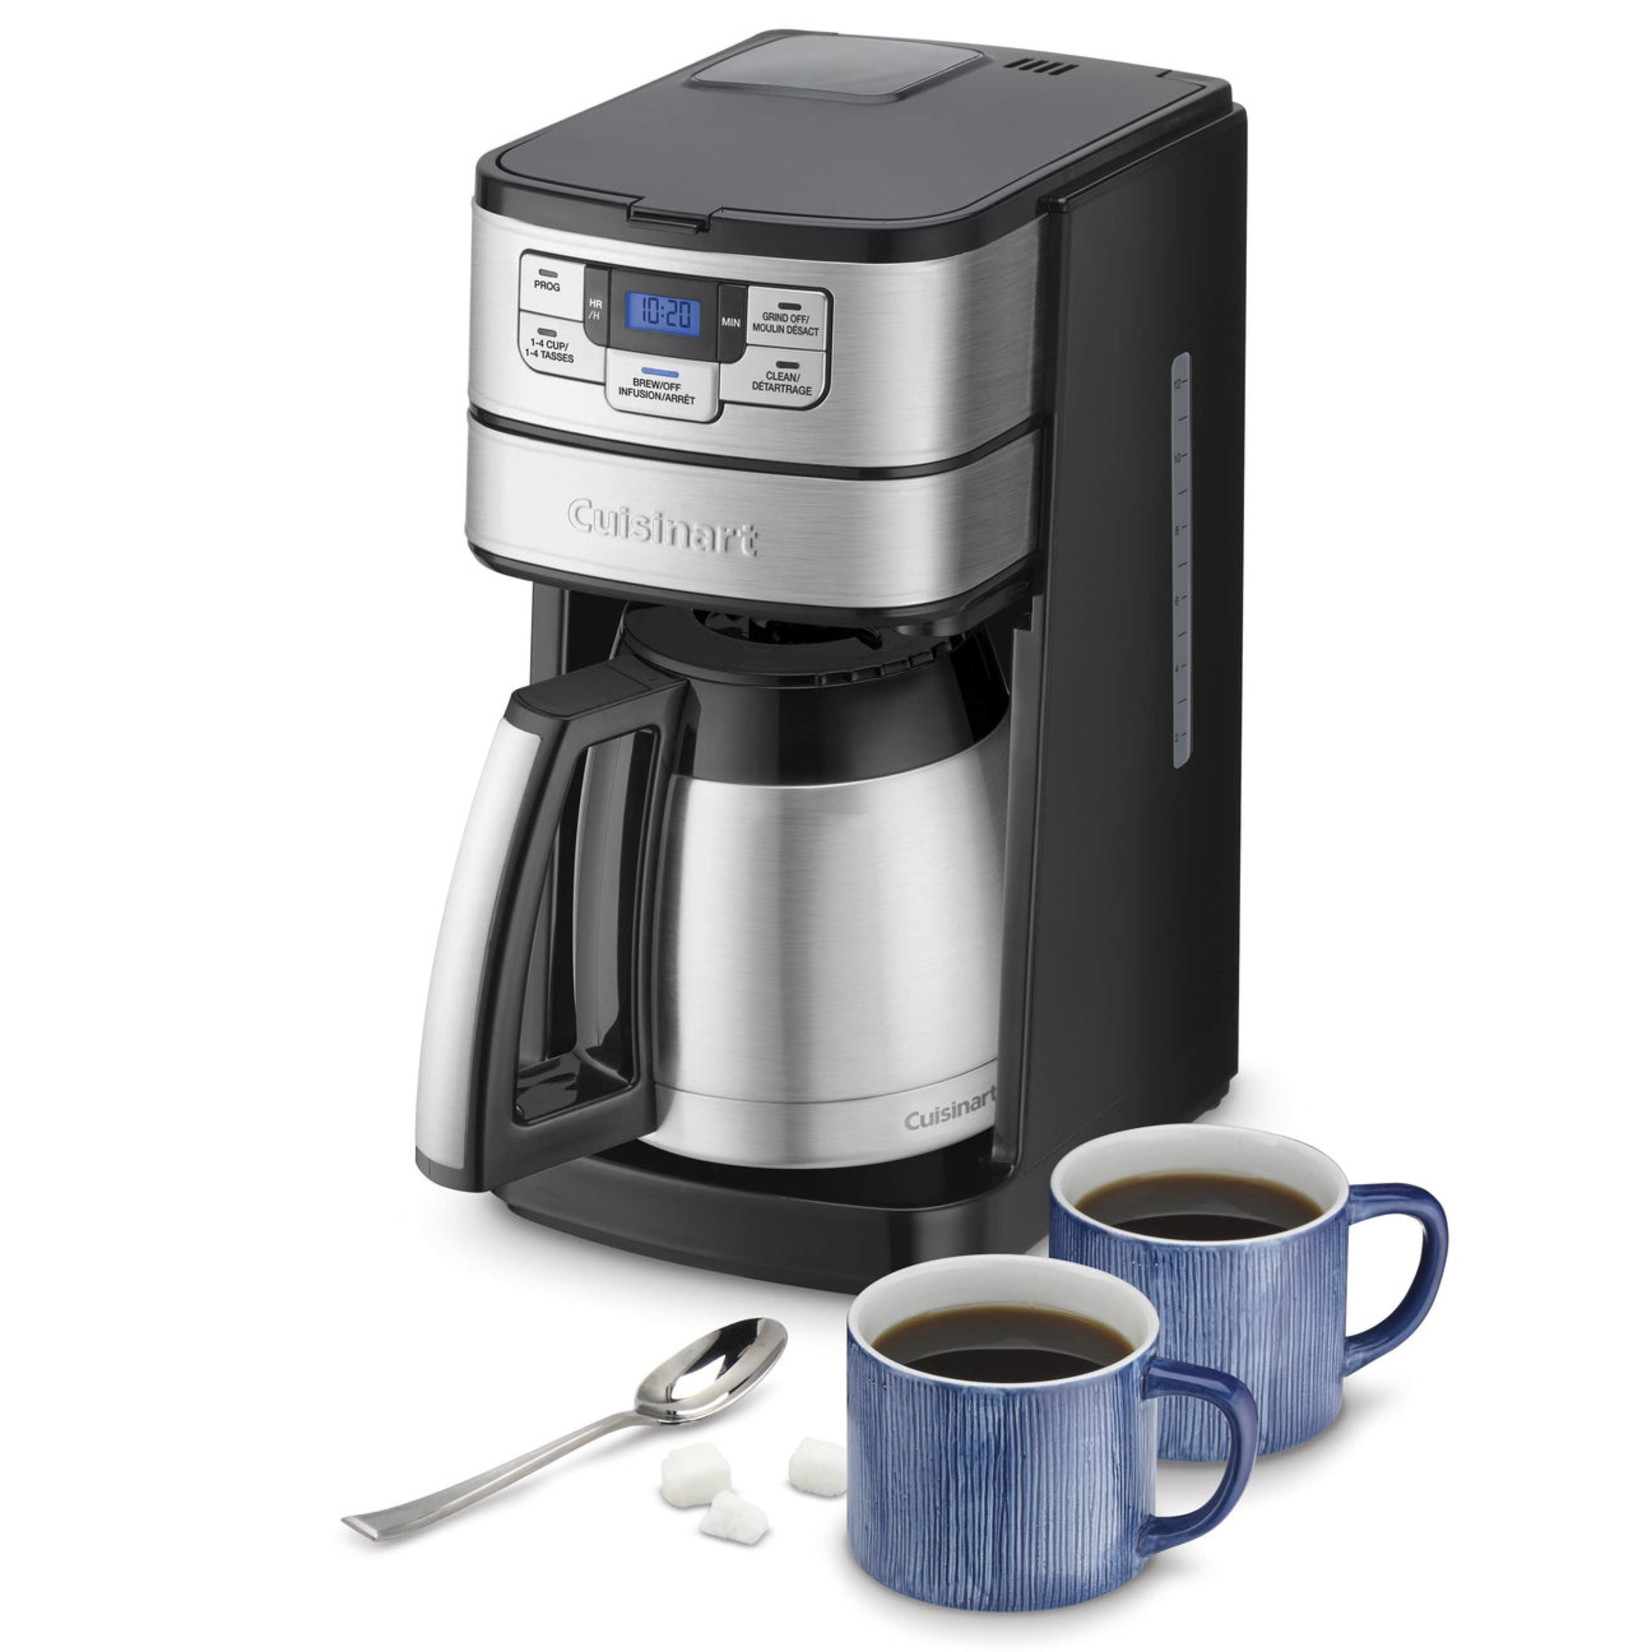 CUISINART Cafetière 10T carafe thermale grind/brew